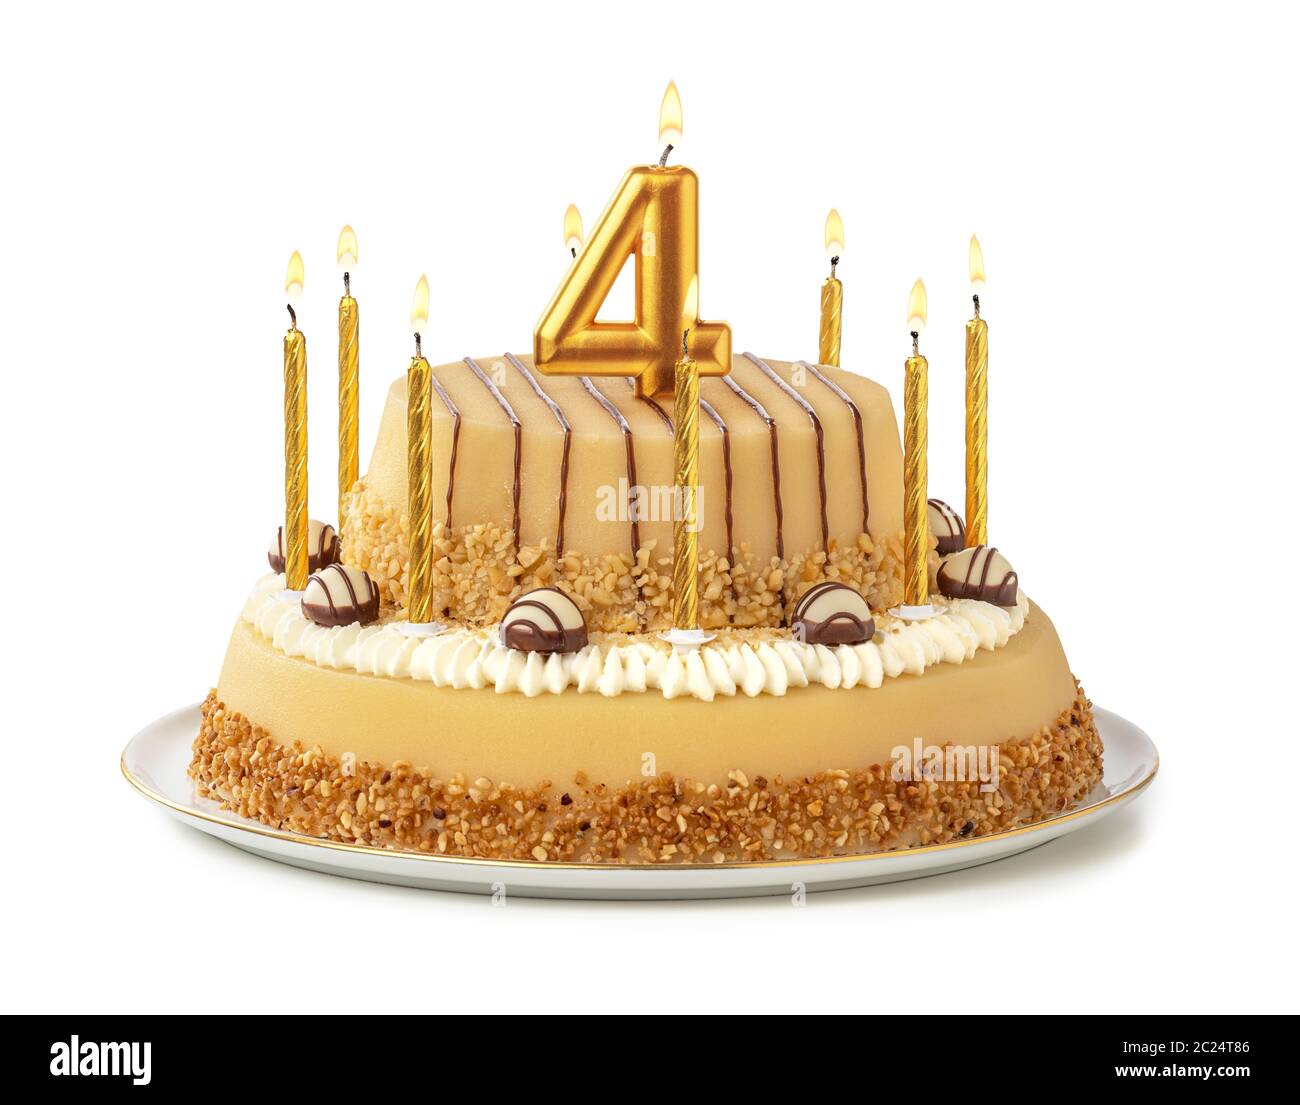 Festive cake with golden candles - Number 4 Stock Photo